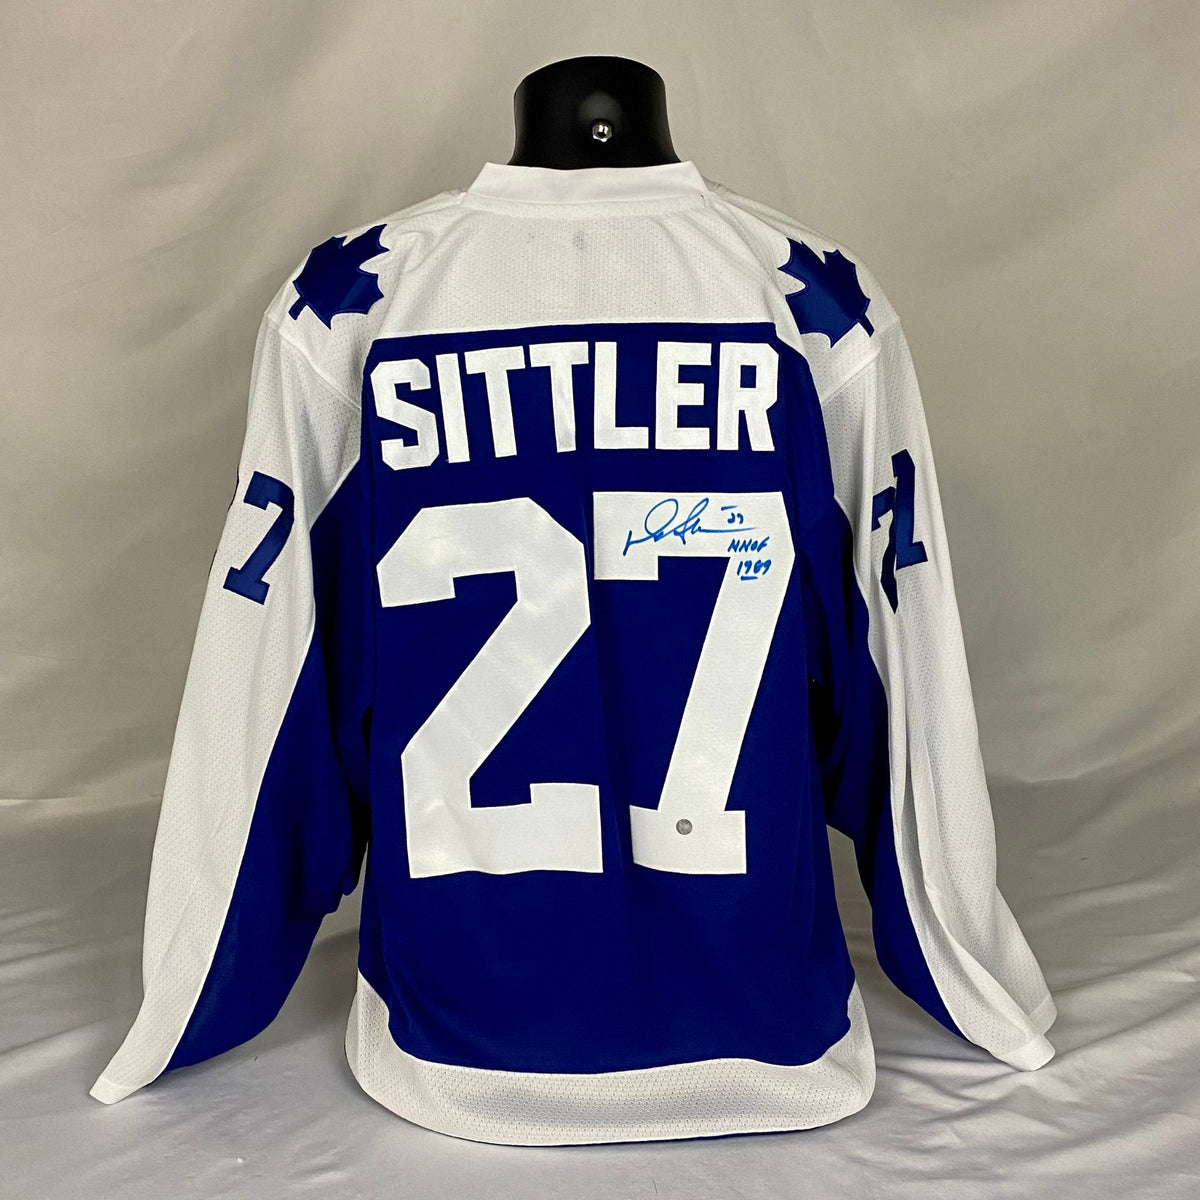 1981 Darryl Sittler Canada Cup Game Worn Jersey. With players like